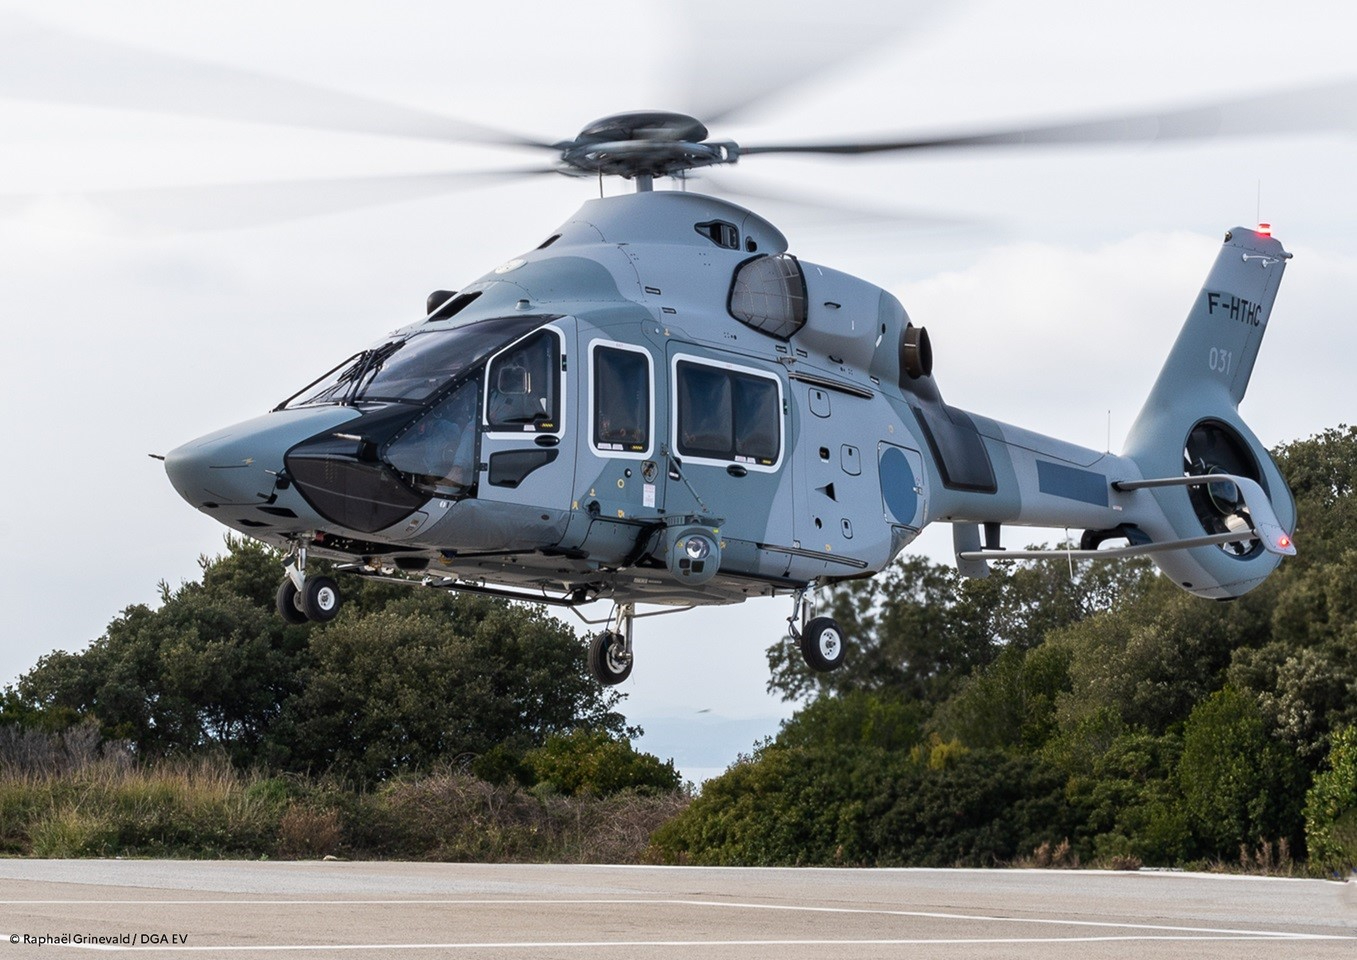 H160 Guépard helicopter. Photo: French Directorate General of Armament